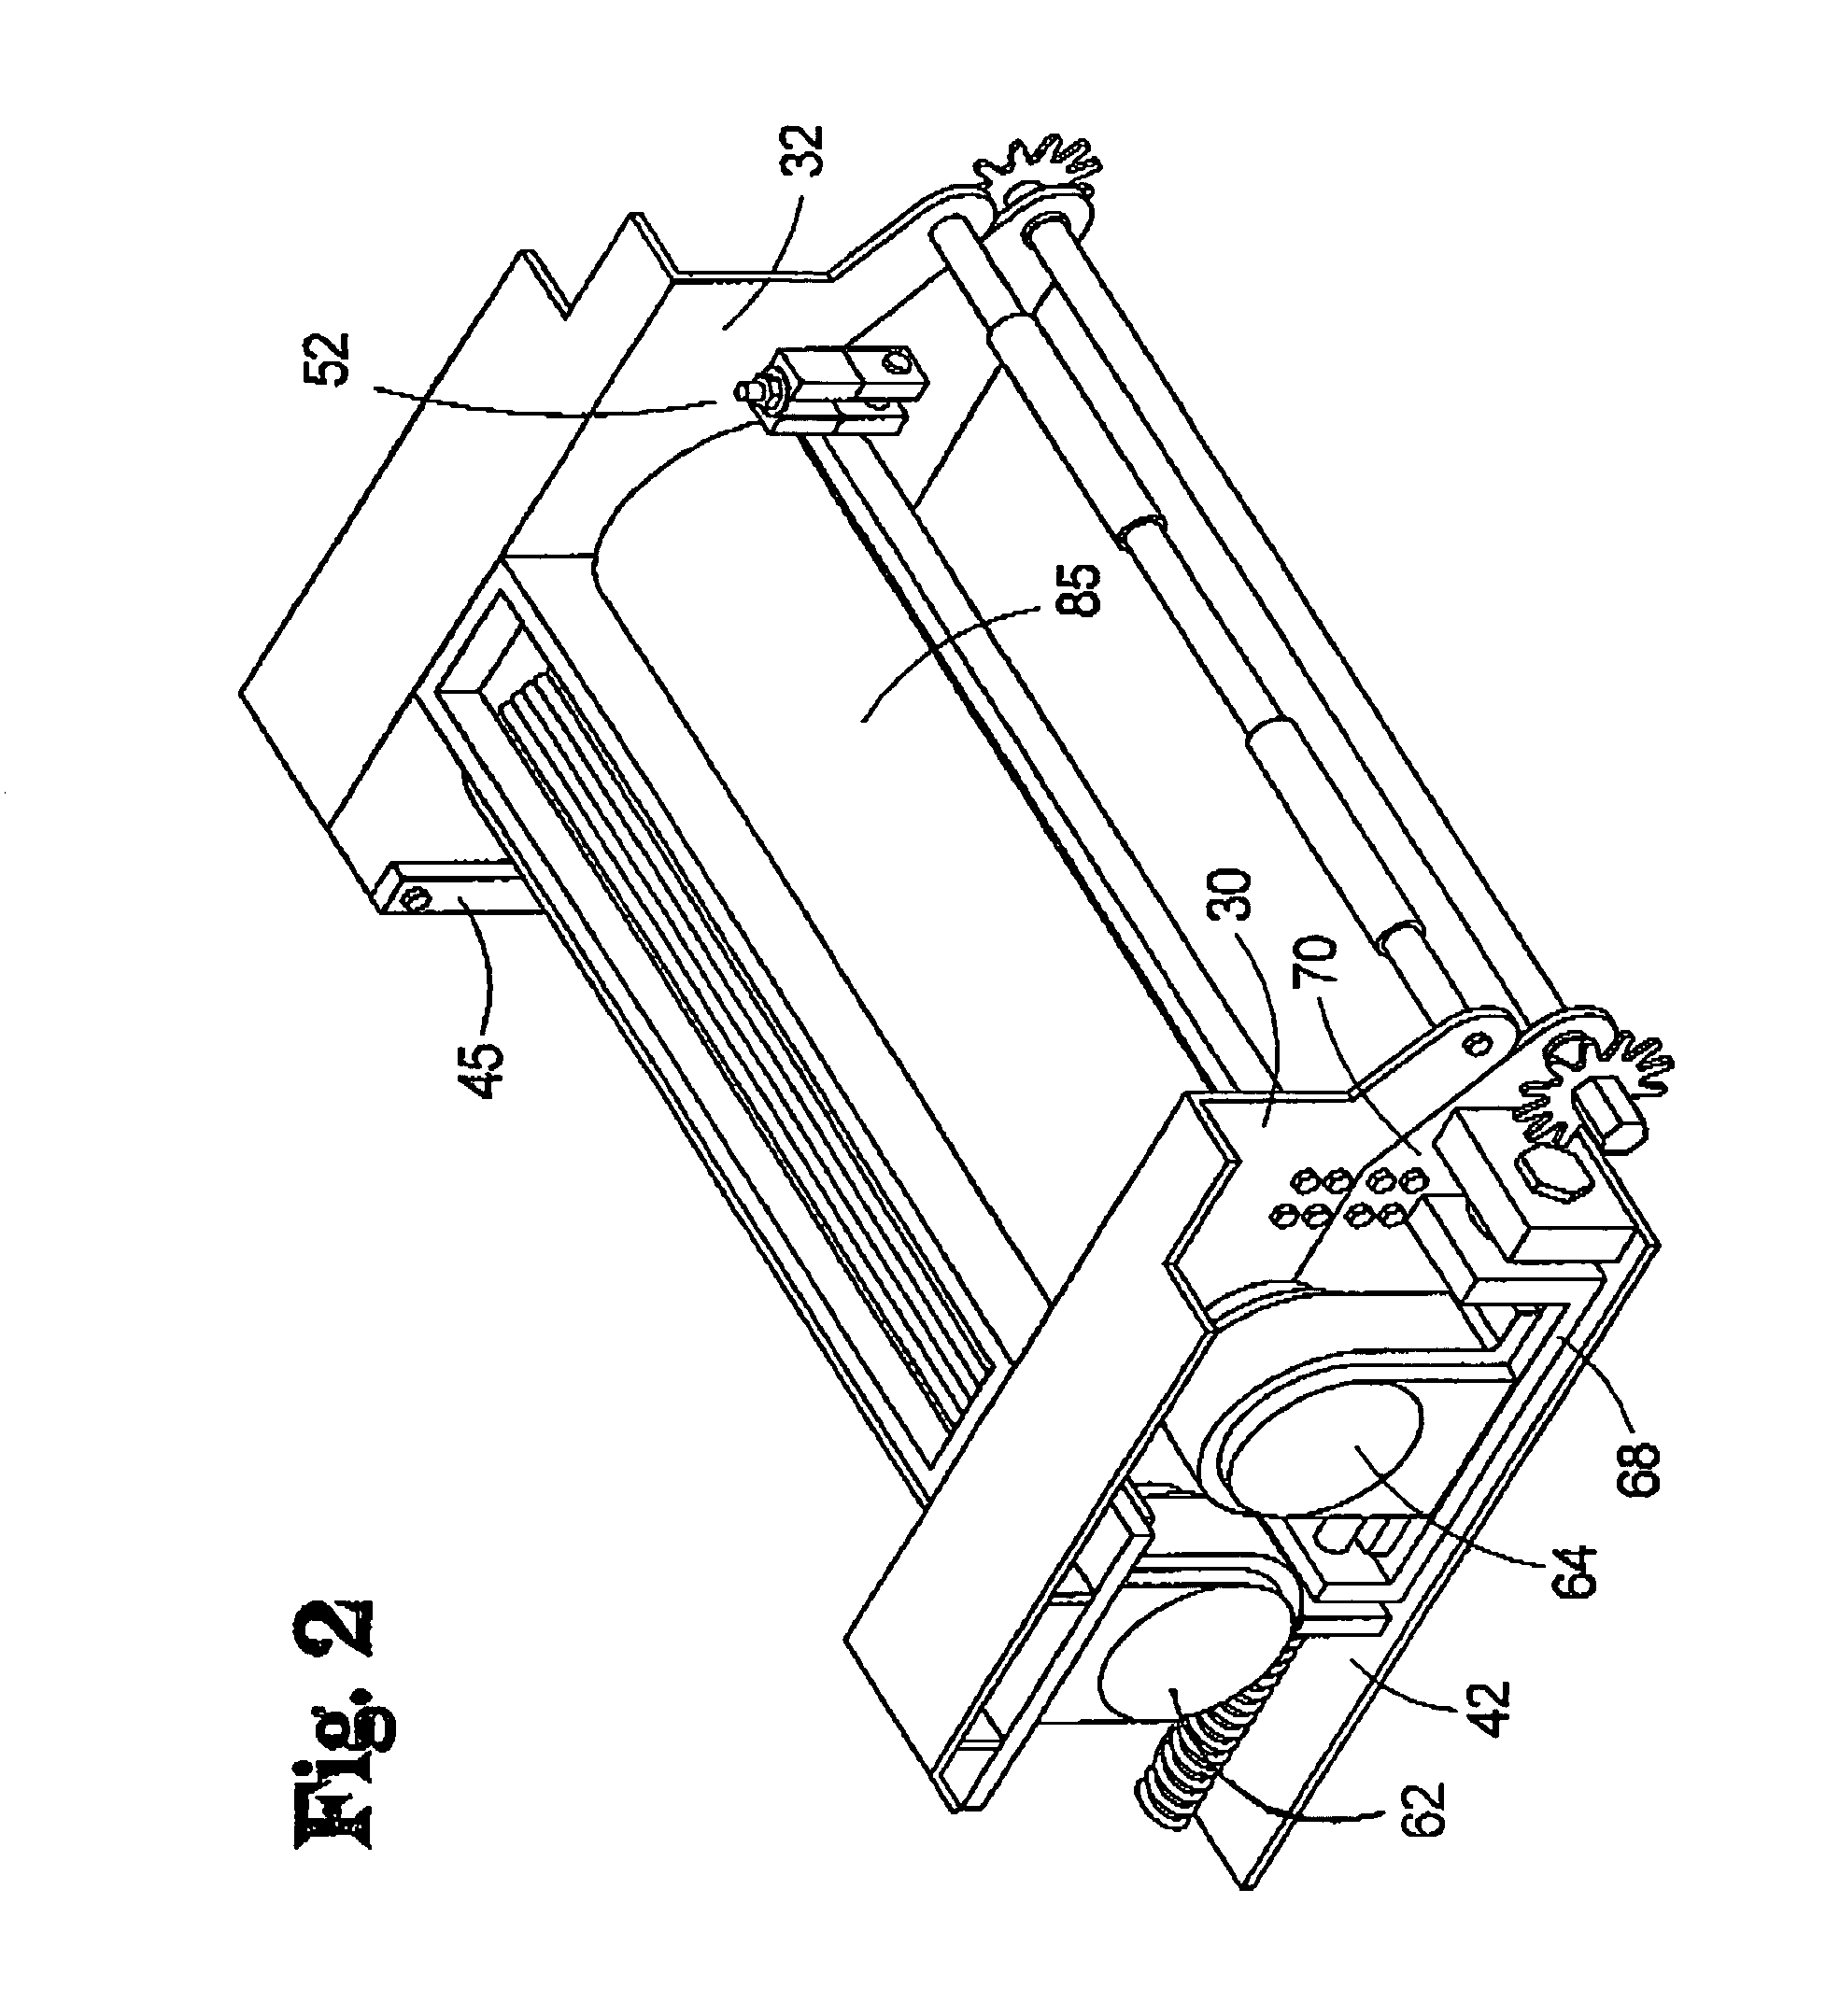 Apparatus for processing crop materials in a forage harvester